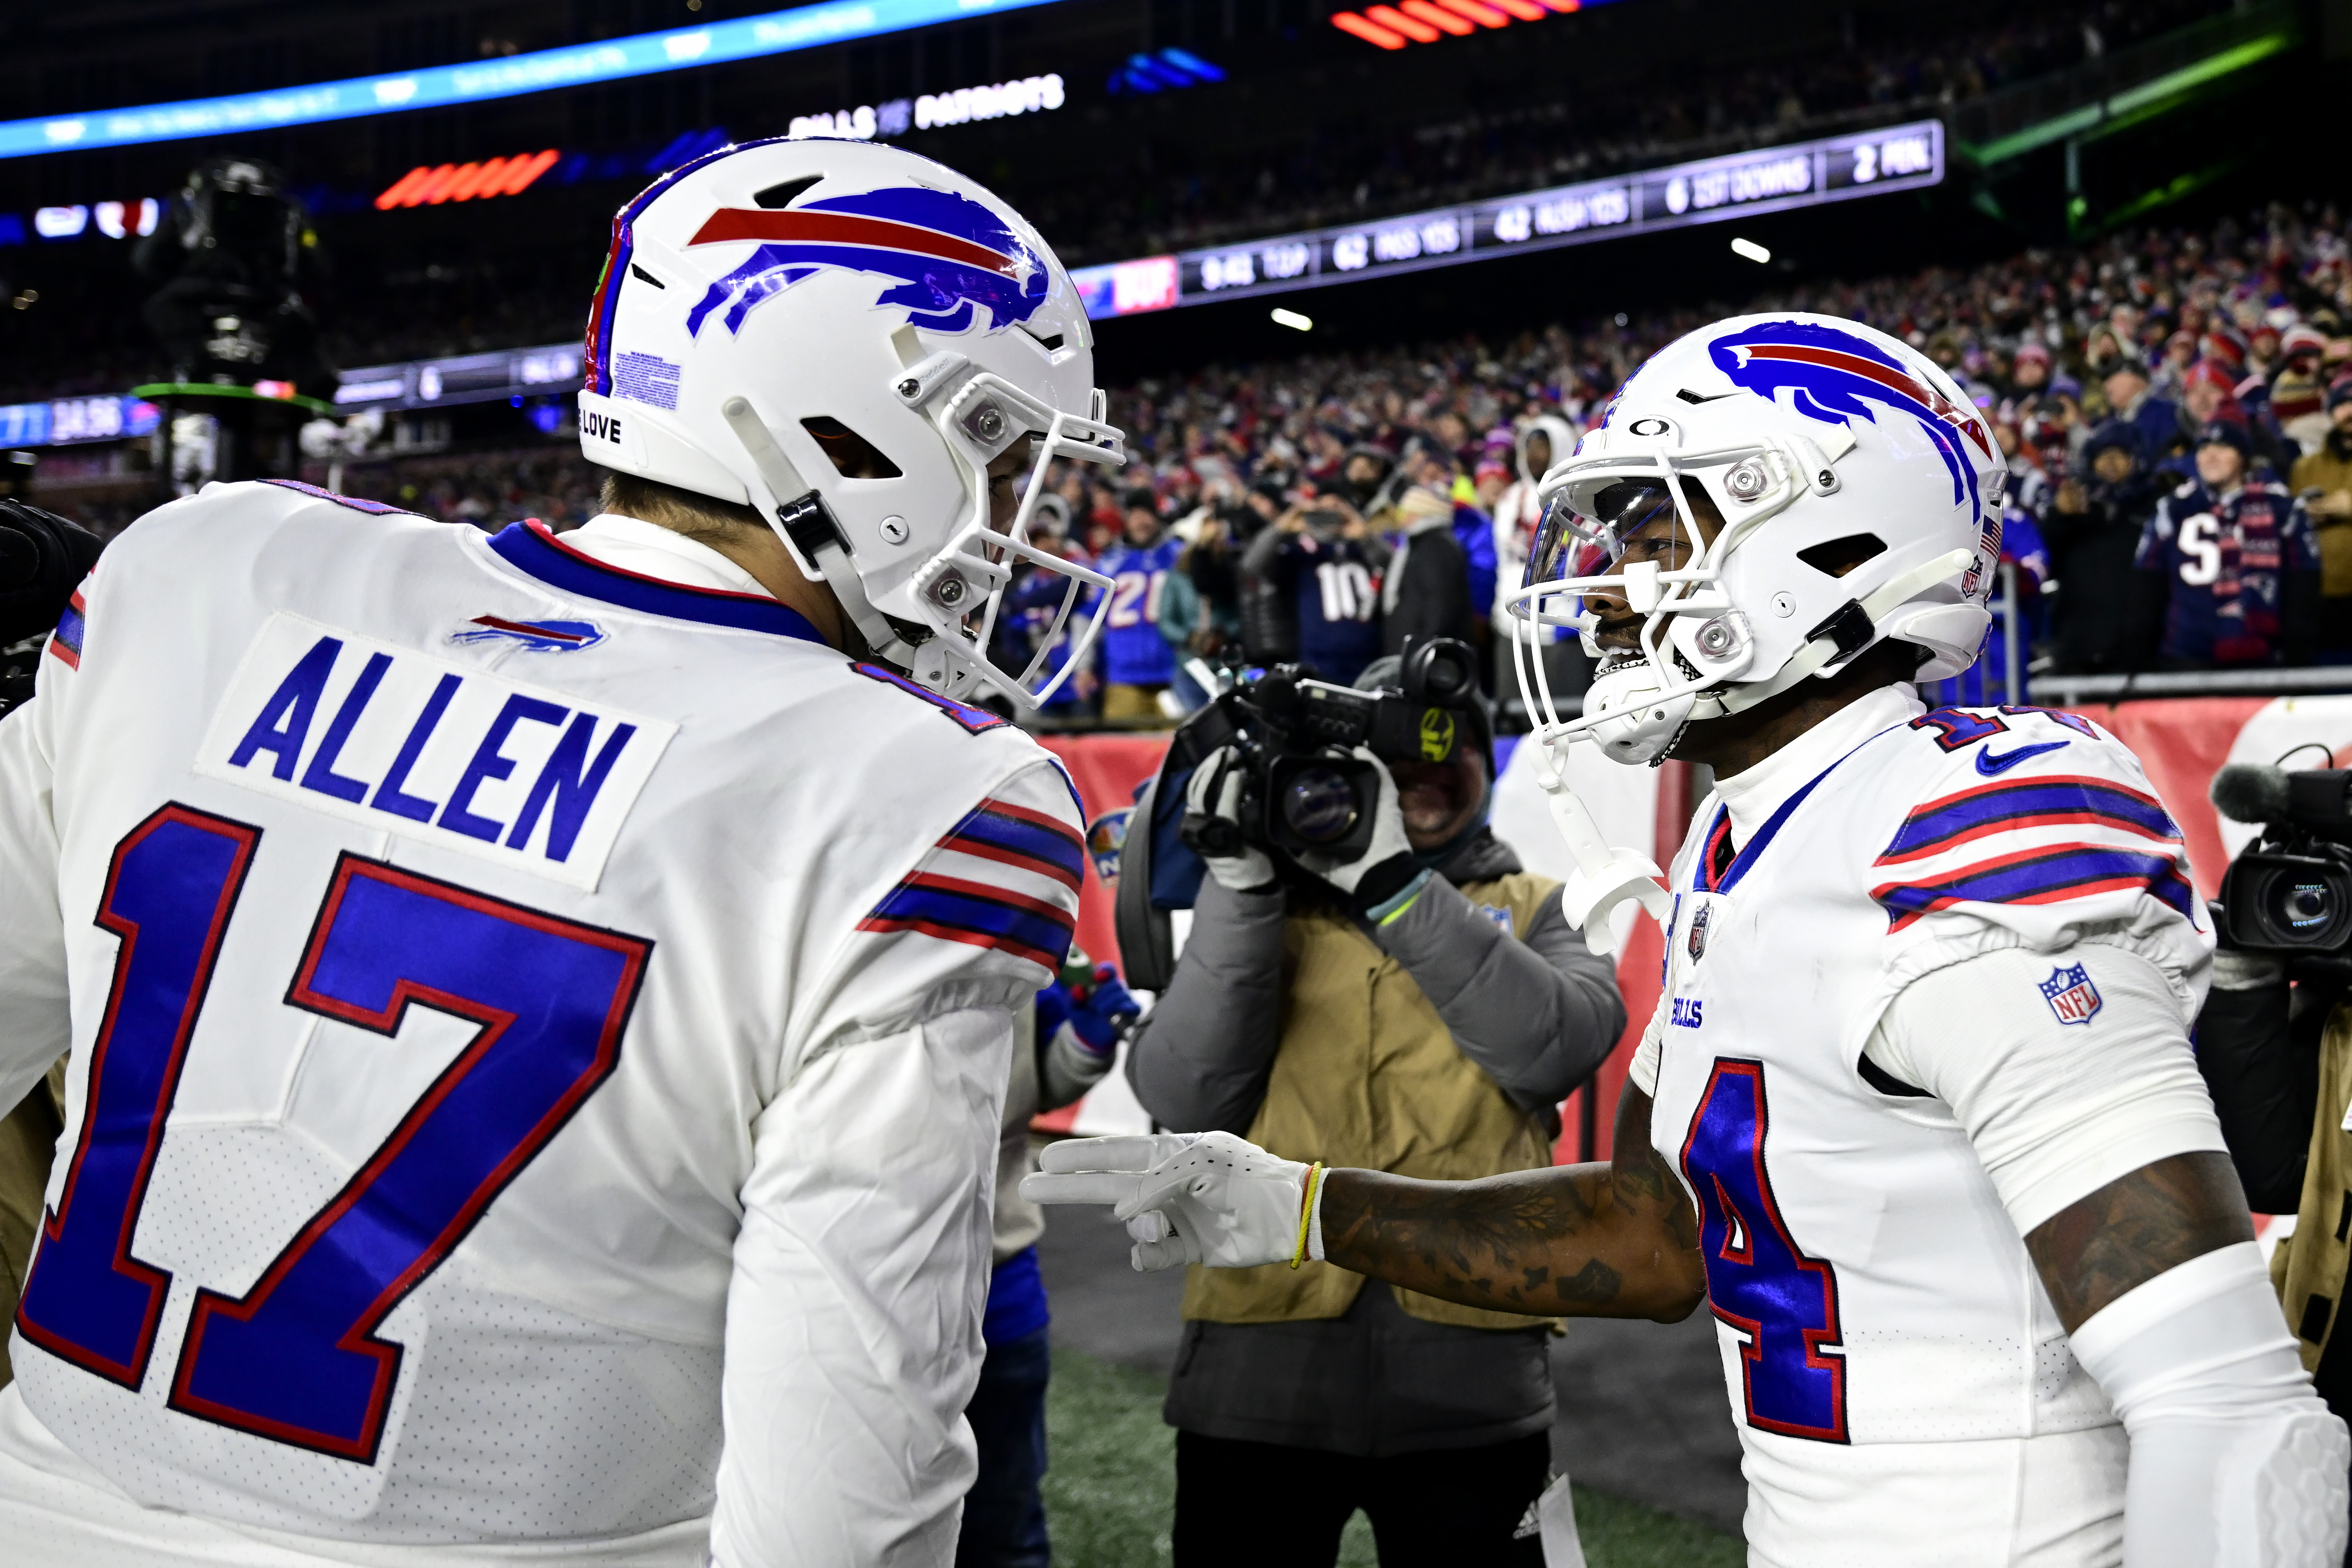 Wide receiver Stefon Diggs of the Buffalo Bills celebrates after catching a first half touchdown pass from quarterback Josh Allen against the New England Patriots at Gillette Stadium on December 01, 2022 in Foxborough, Massachusetts.